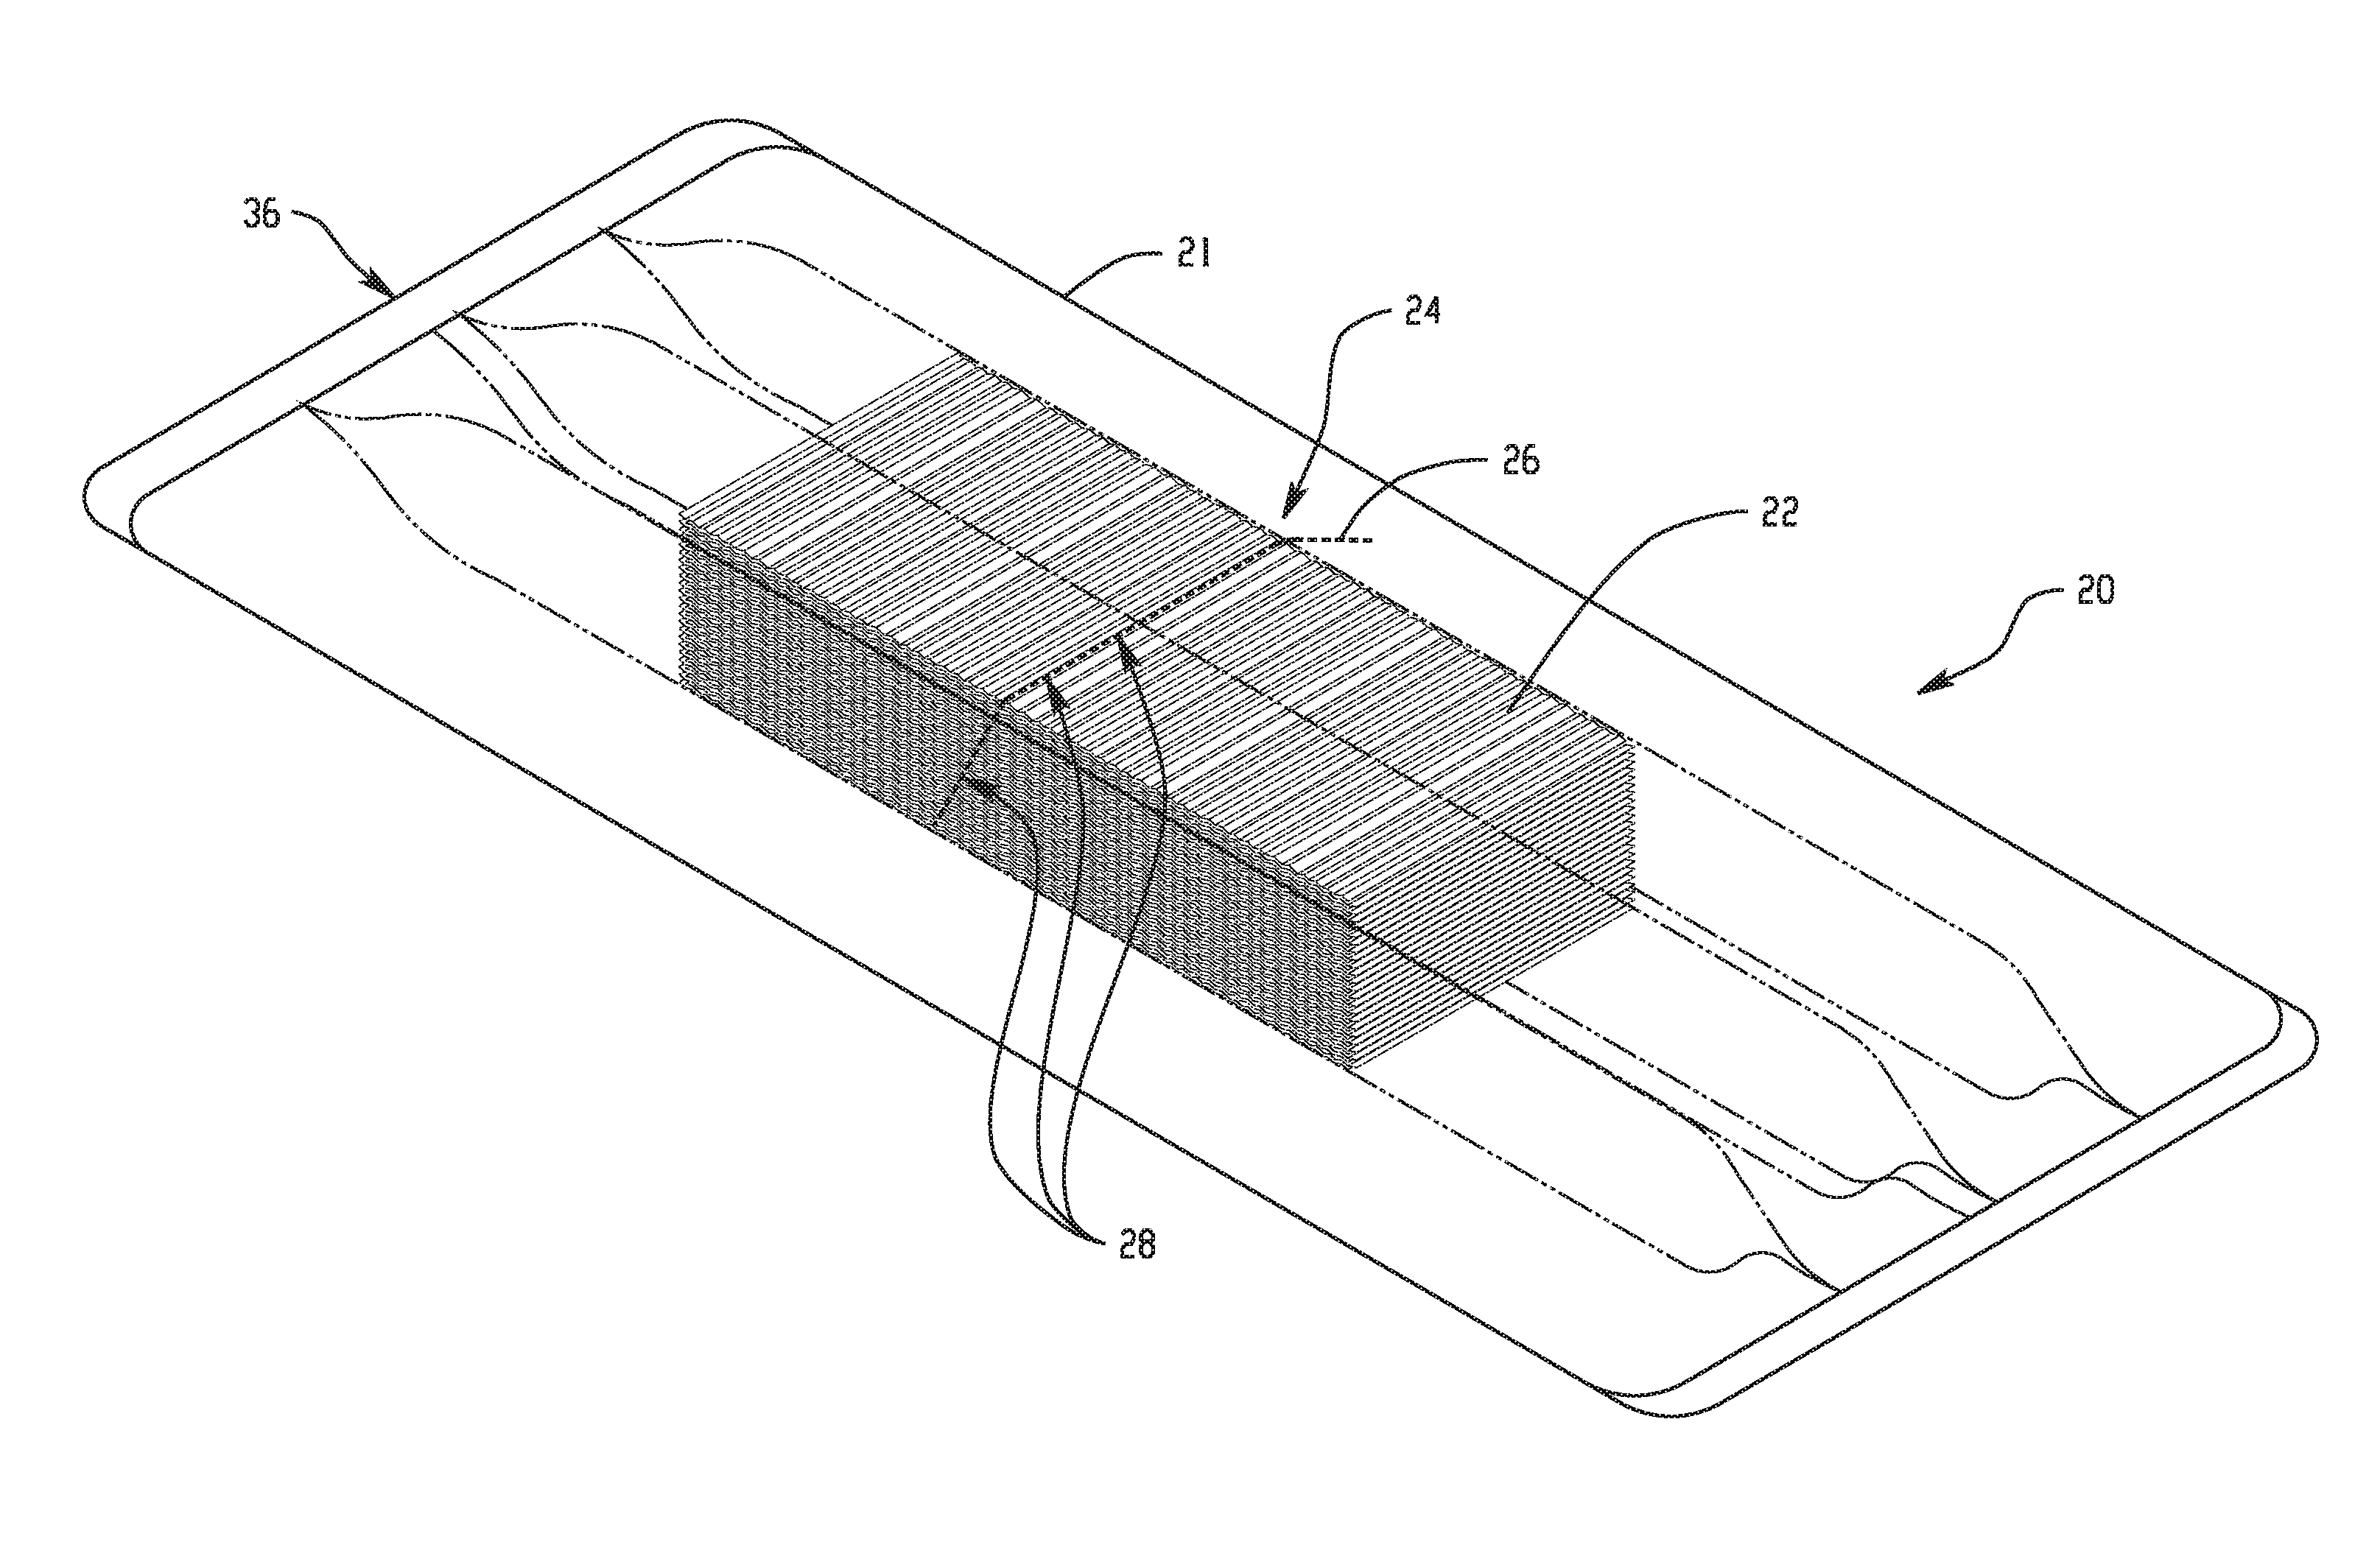 Bend to open flat poly-pack tissue cassette for use in over-shell dispensers